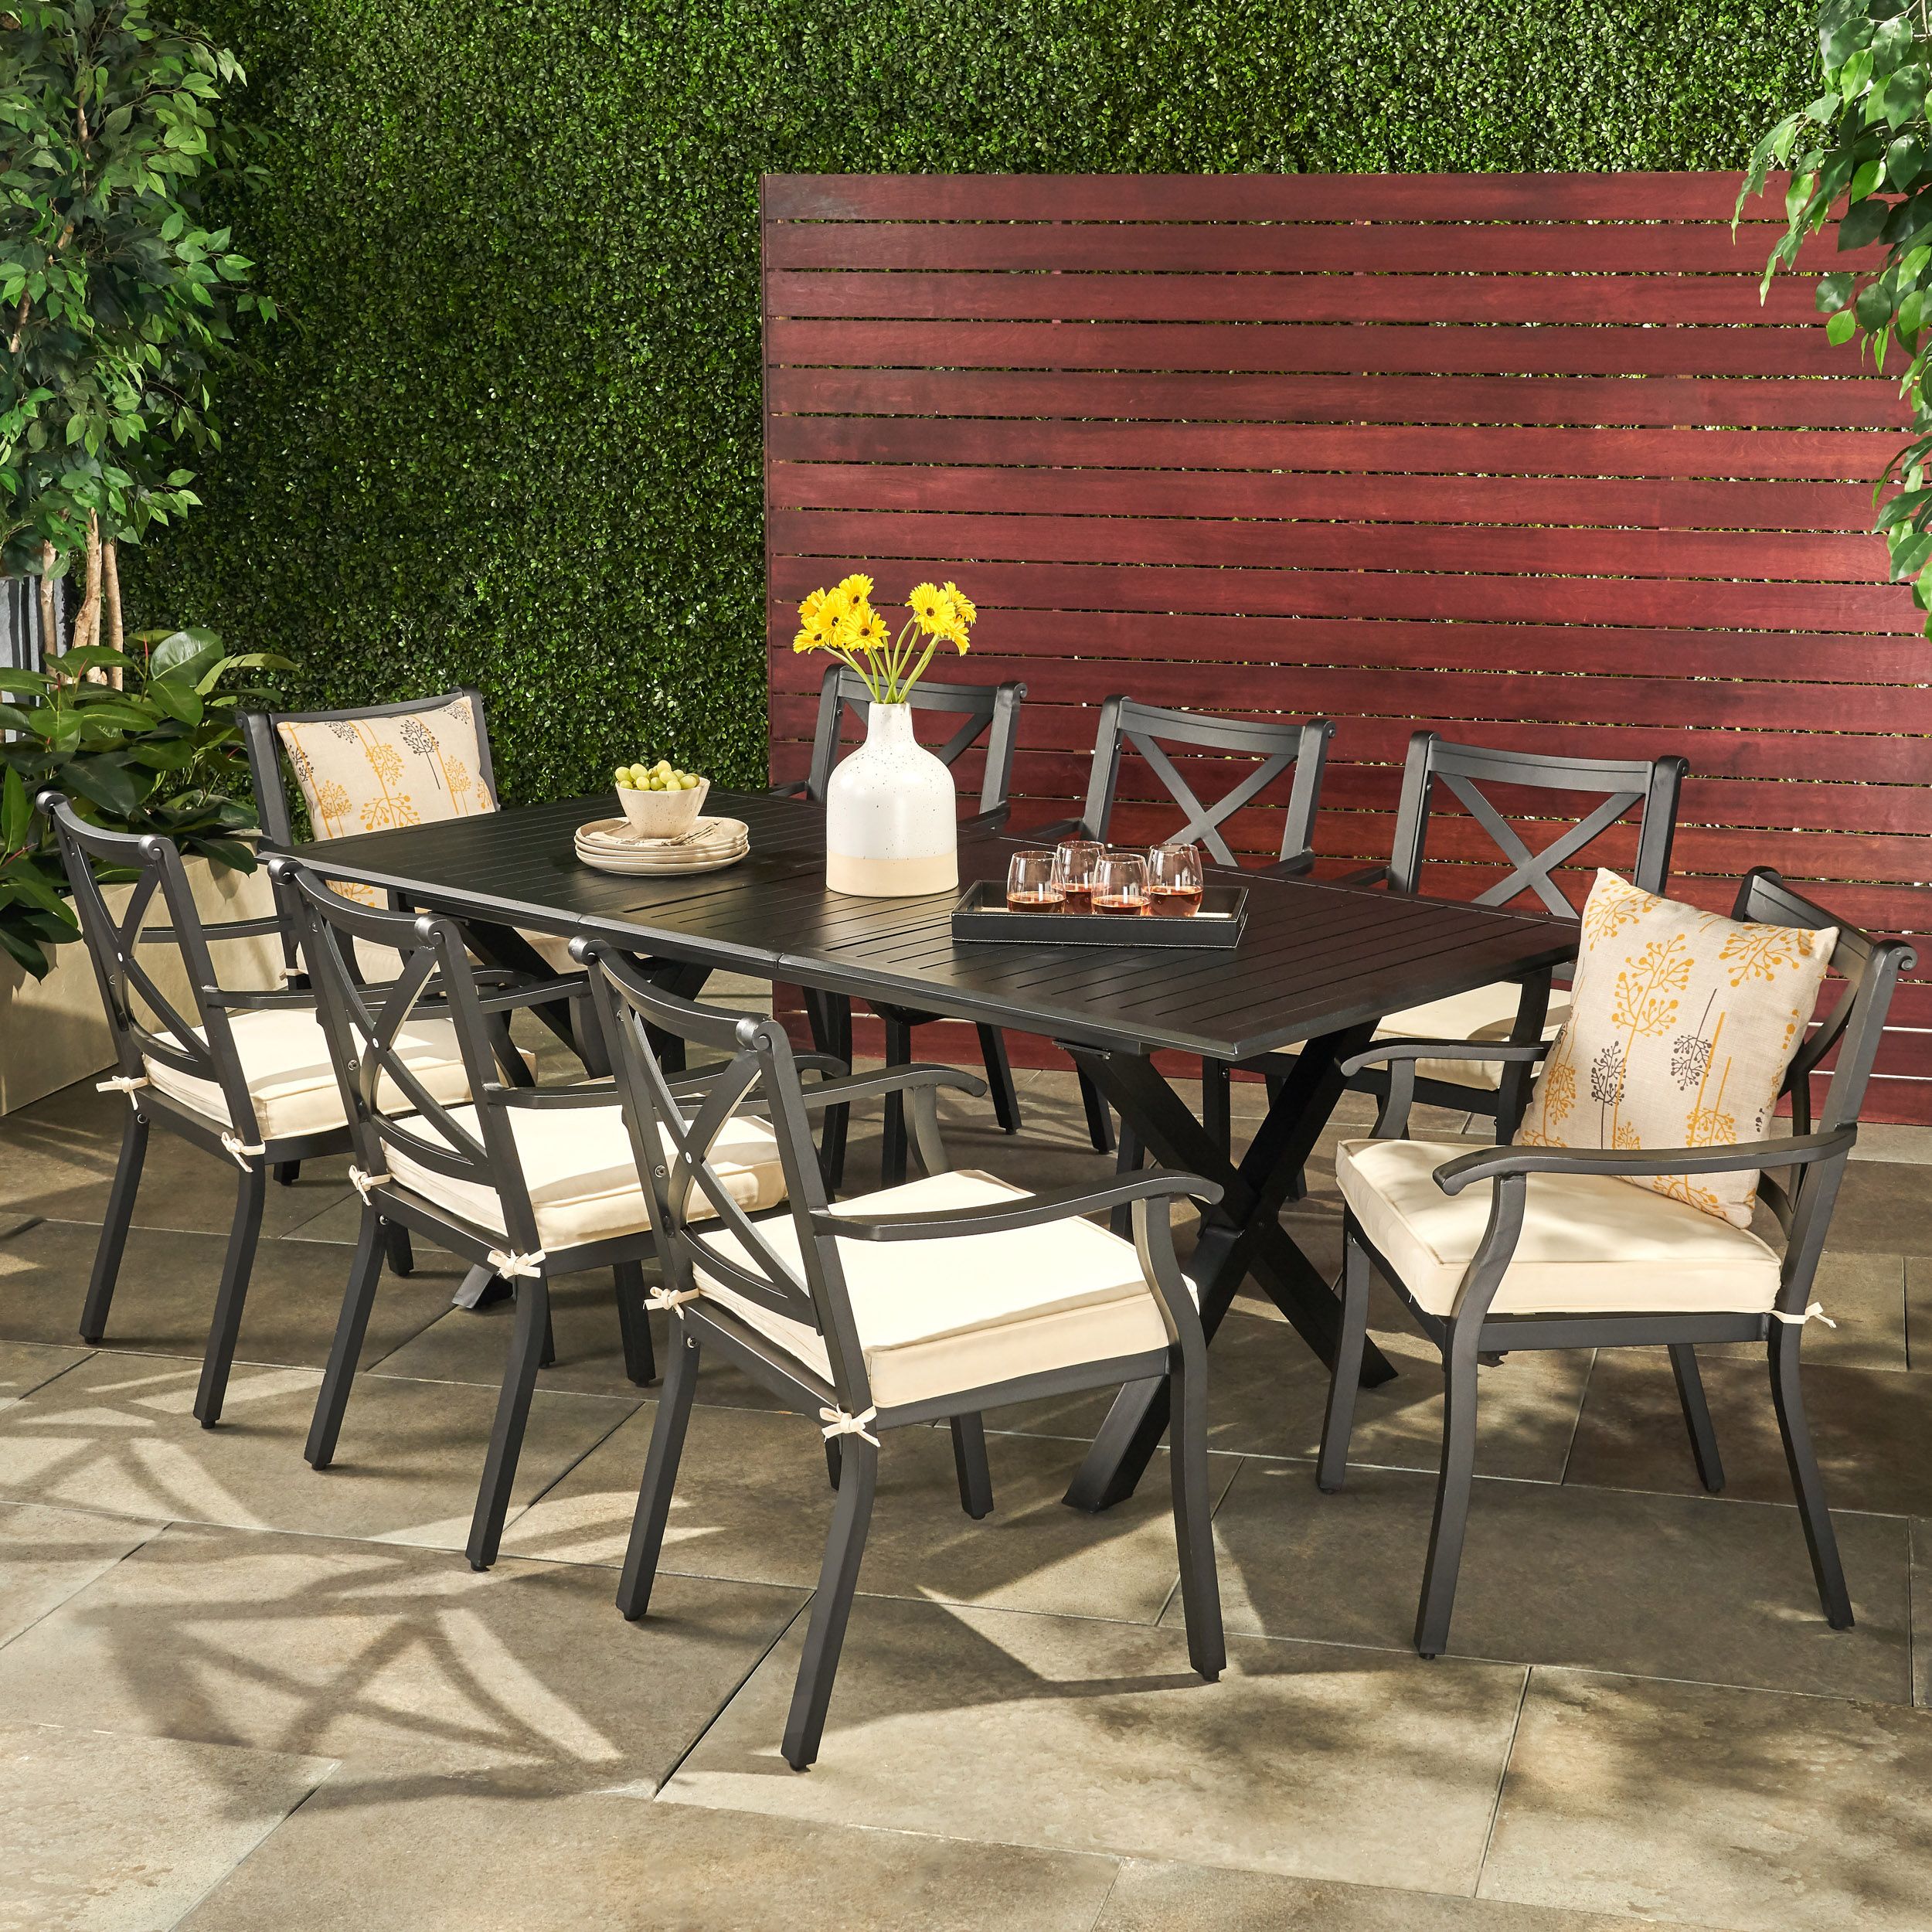 Eowyn Outdoor 9 Piece Cast Aluminum Dining Set With Ivory Water Inside 9 Piece Rectangular Patio Dining Sets (View 8 of 15)